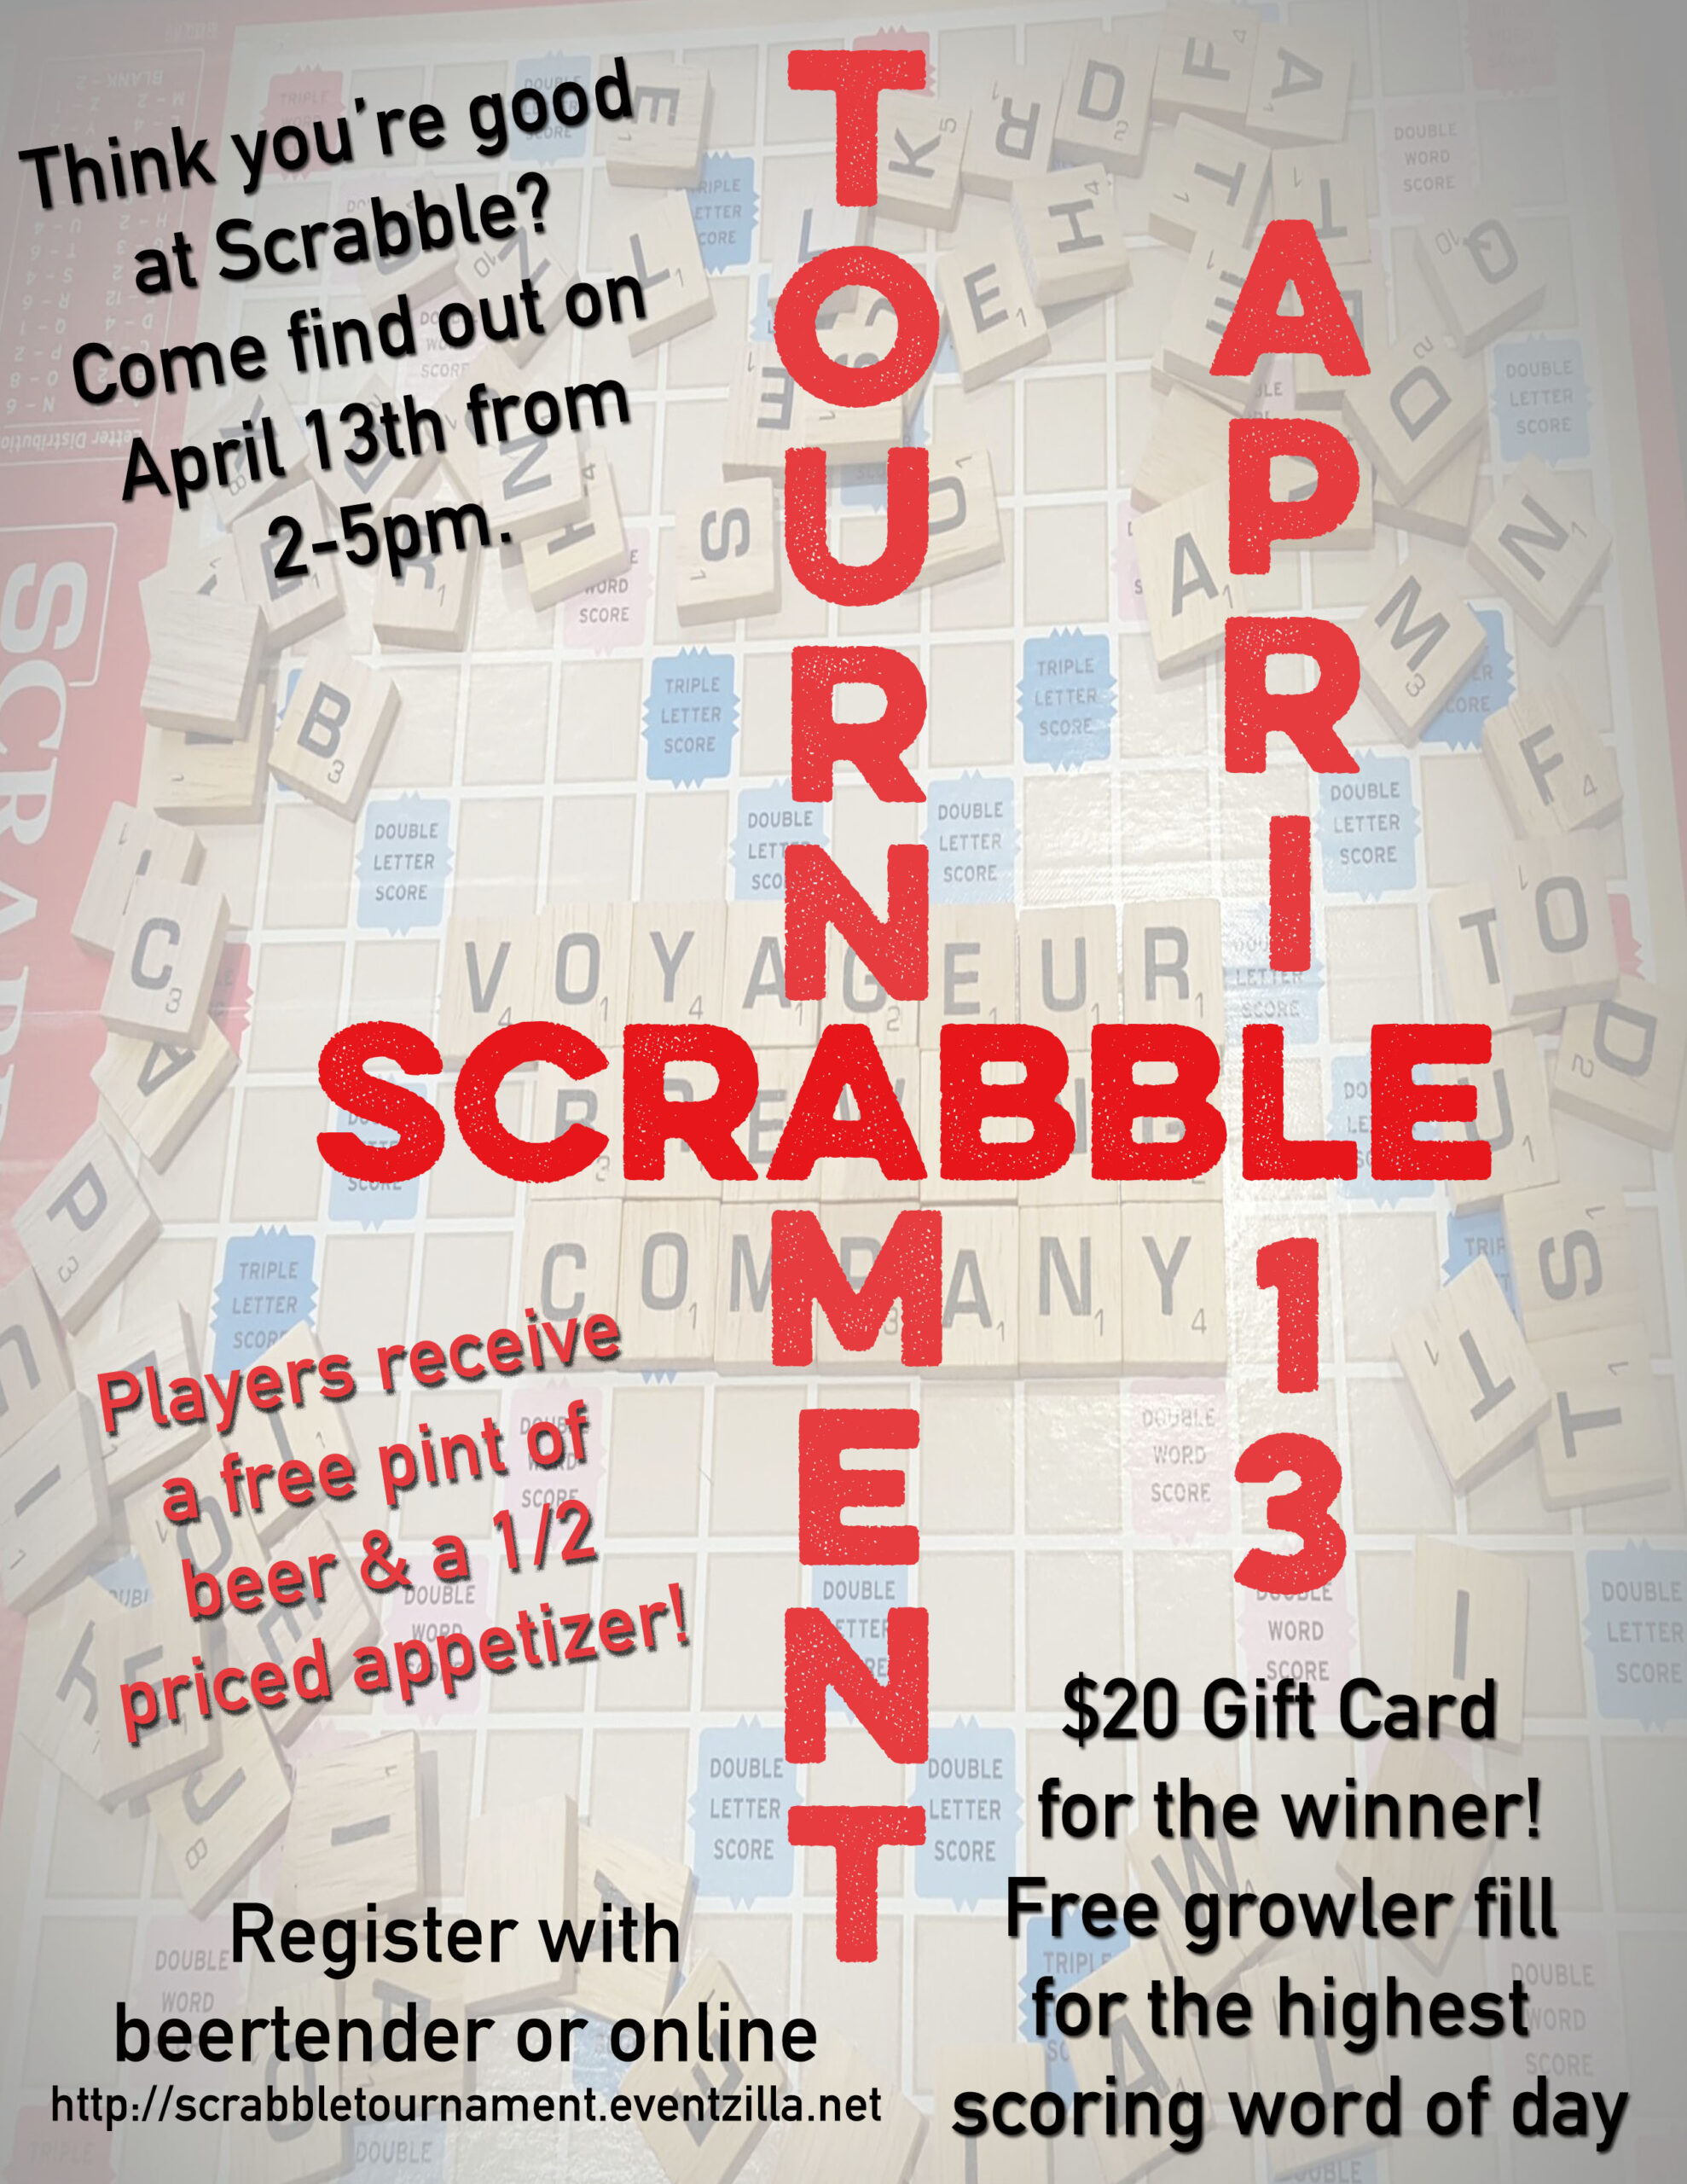 Scrabble at Voyageur Brewing